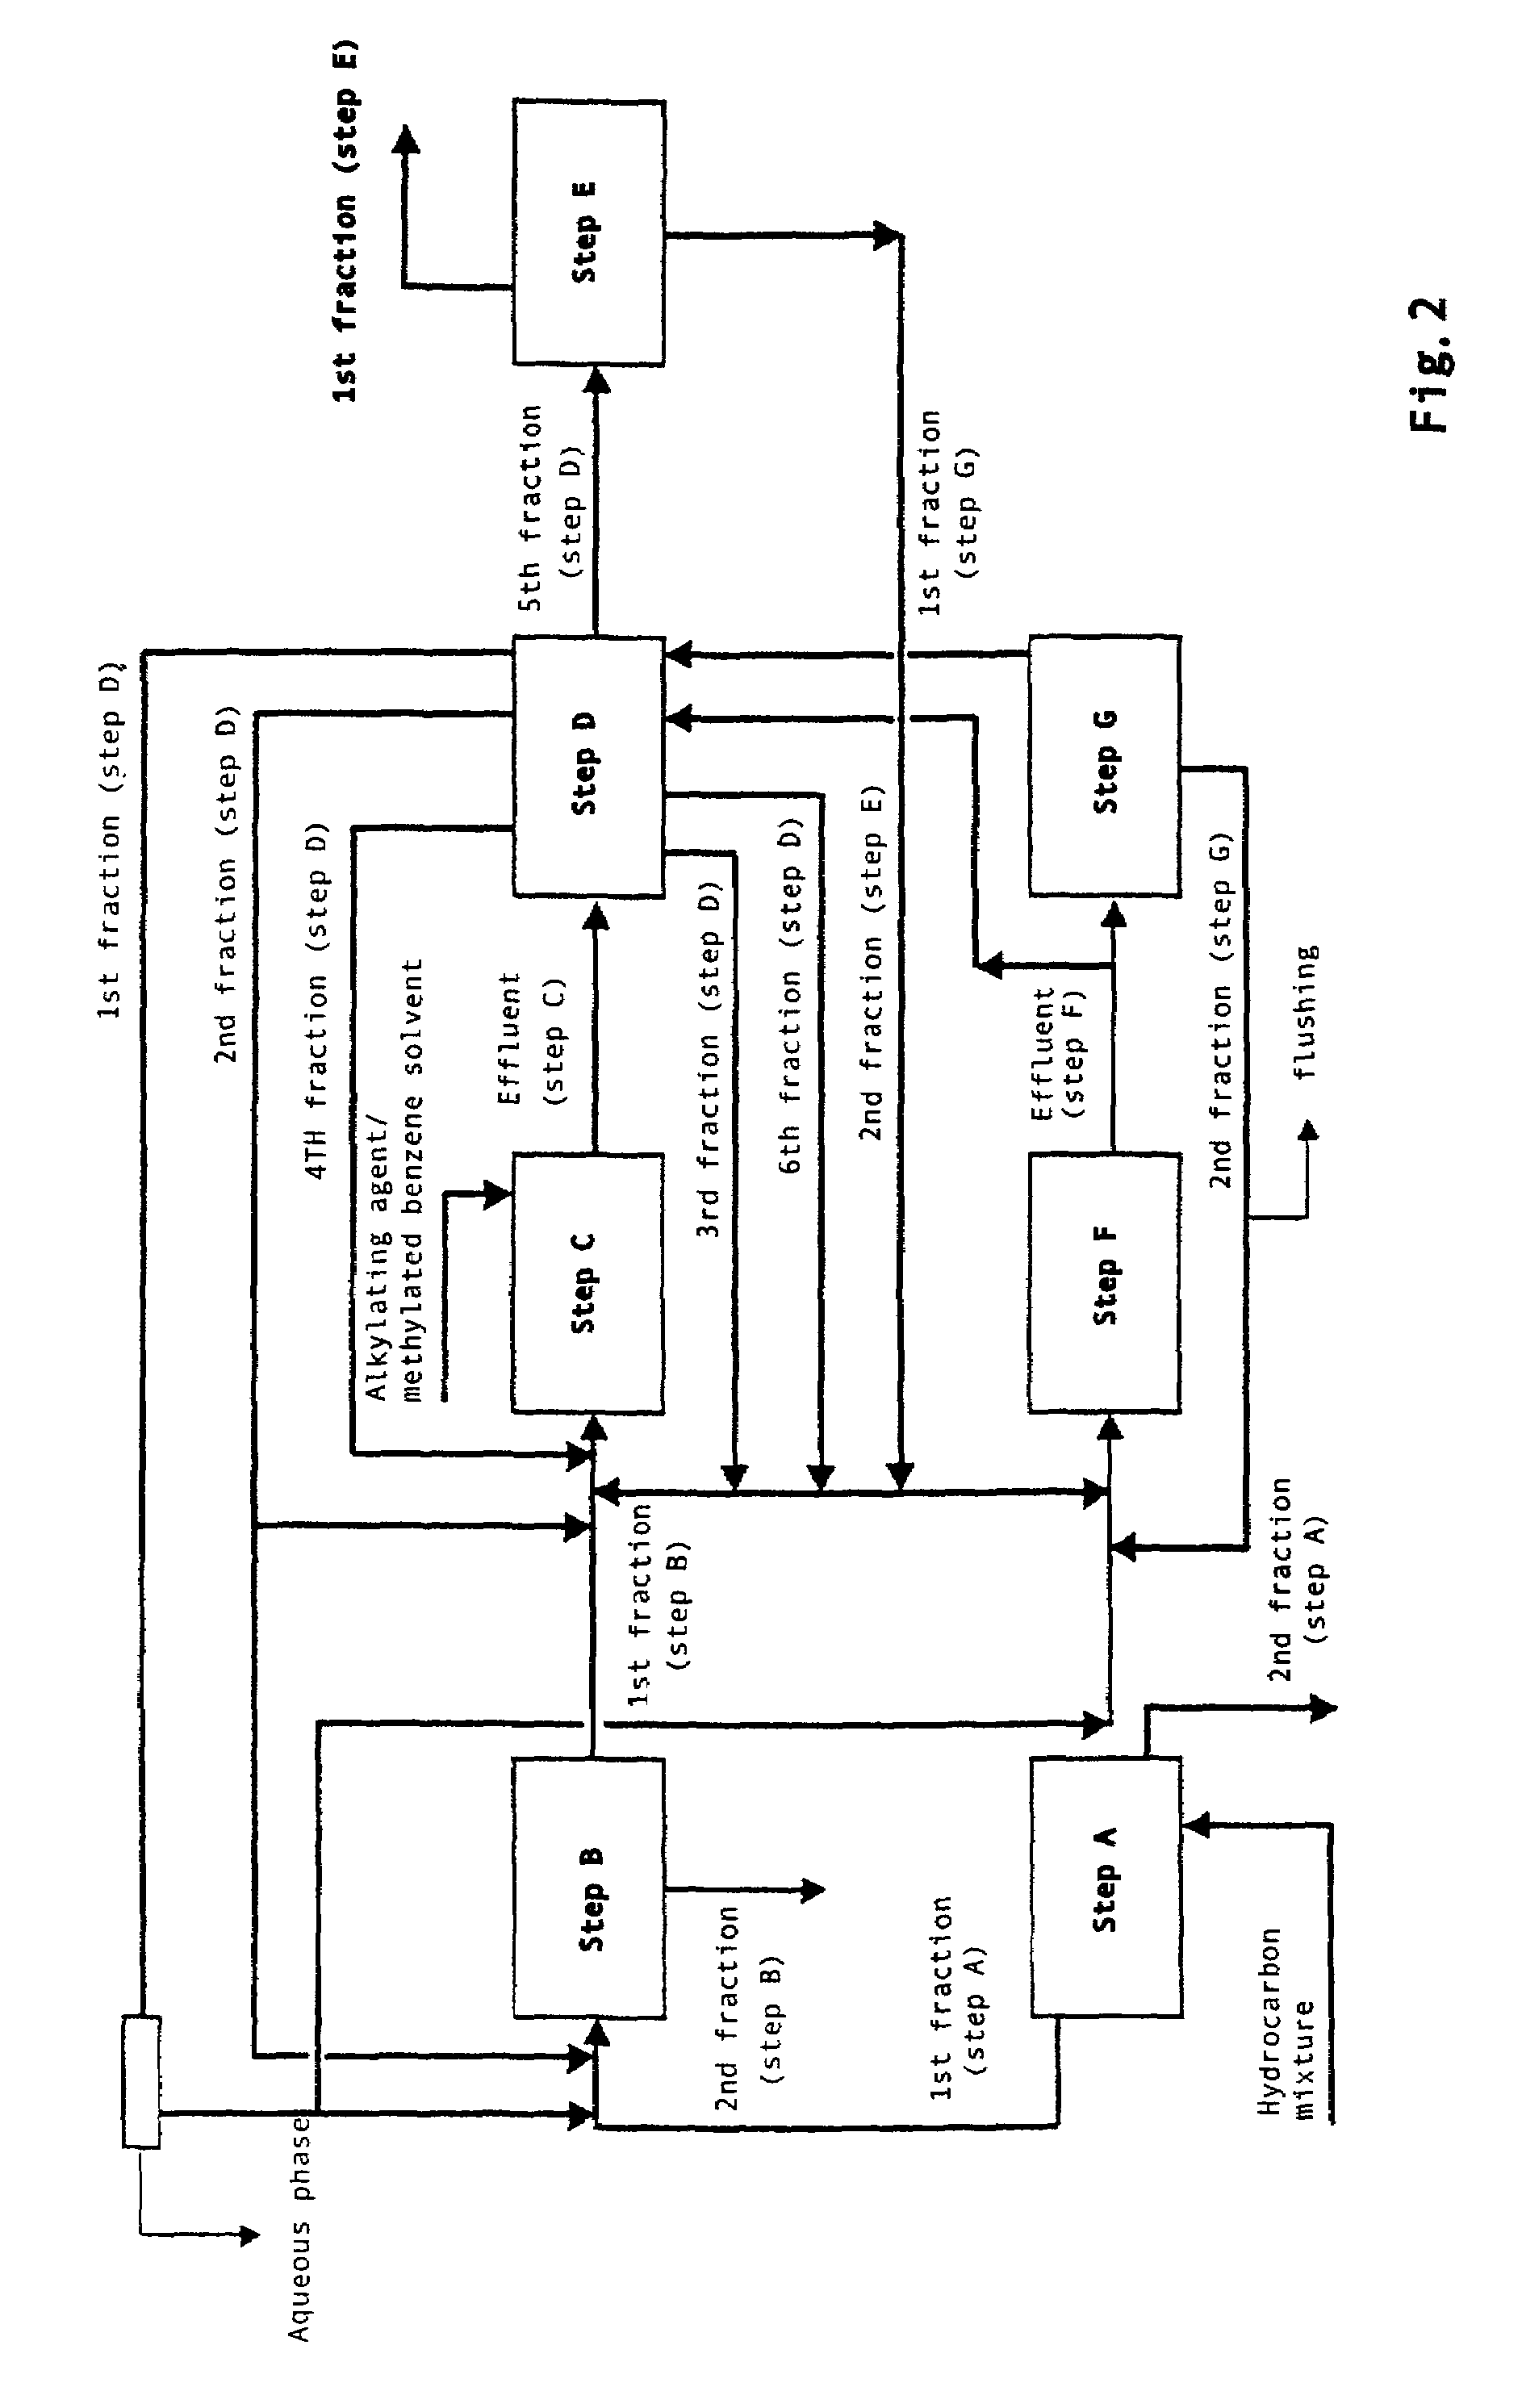 Integrated process for the production of 2,6-dimethylnaphthalene